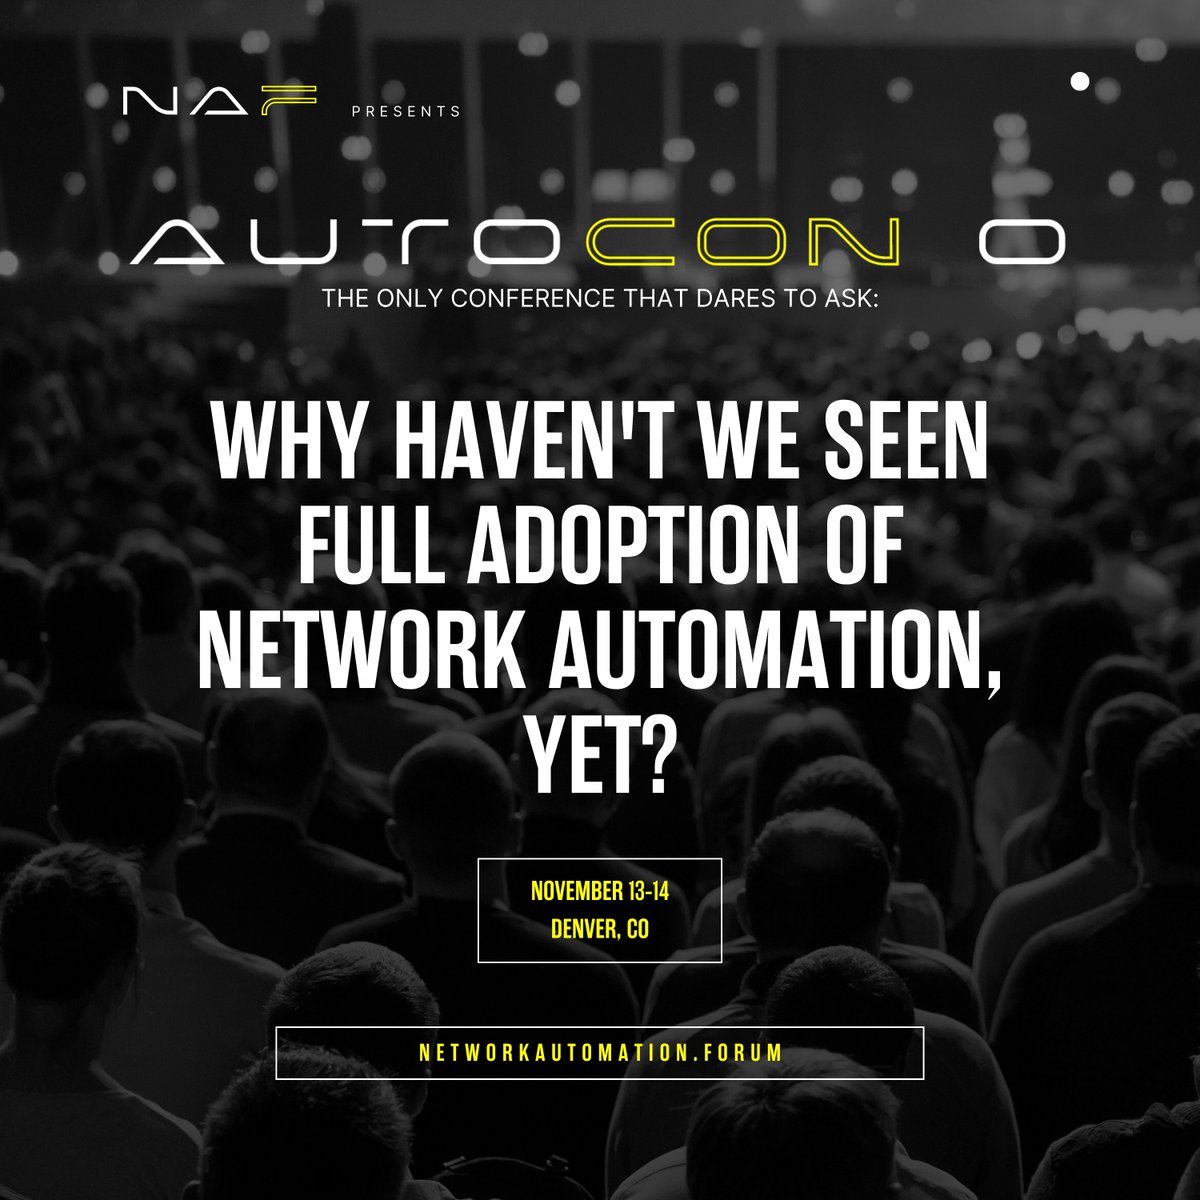 Drew & Ethan from the Packet Pushers will be at the Network Automation Forum's AutoCon 0 event. We'll be attending sessions & recording content as media partners. Join us on Nov 13+14 in Denver! Event is expected to sell out. Register here: bit.ly/3LpQVOv